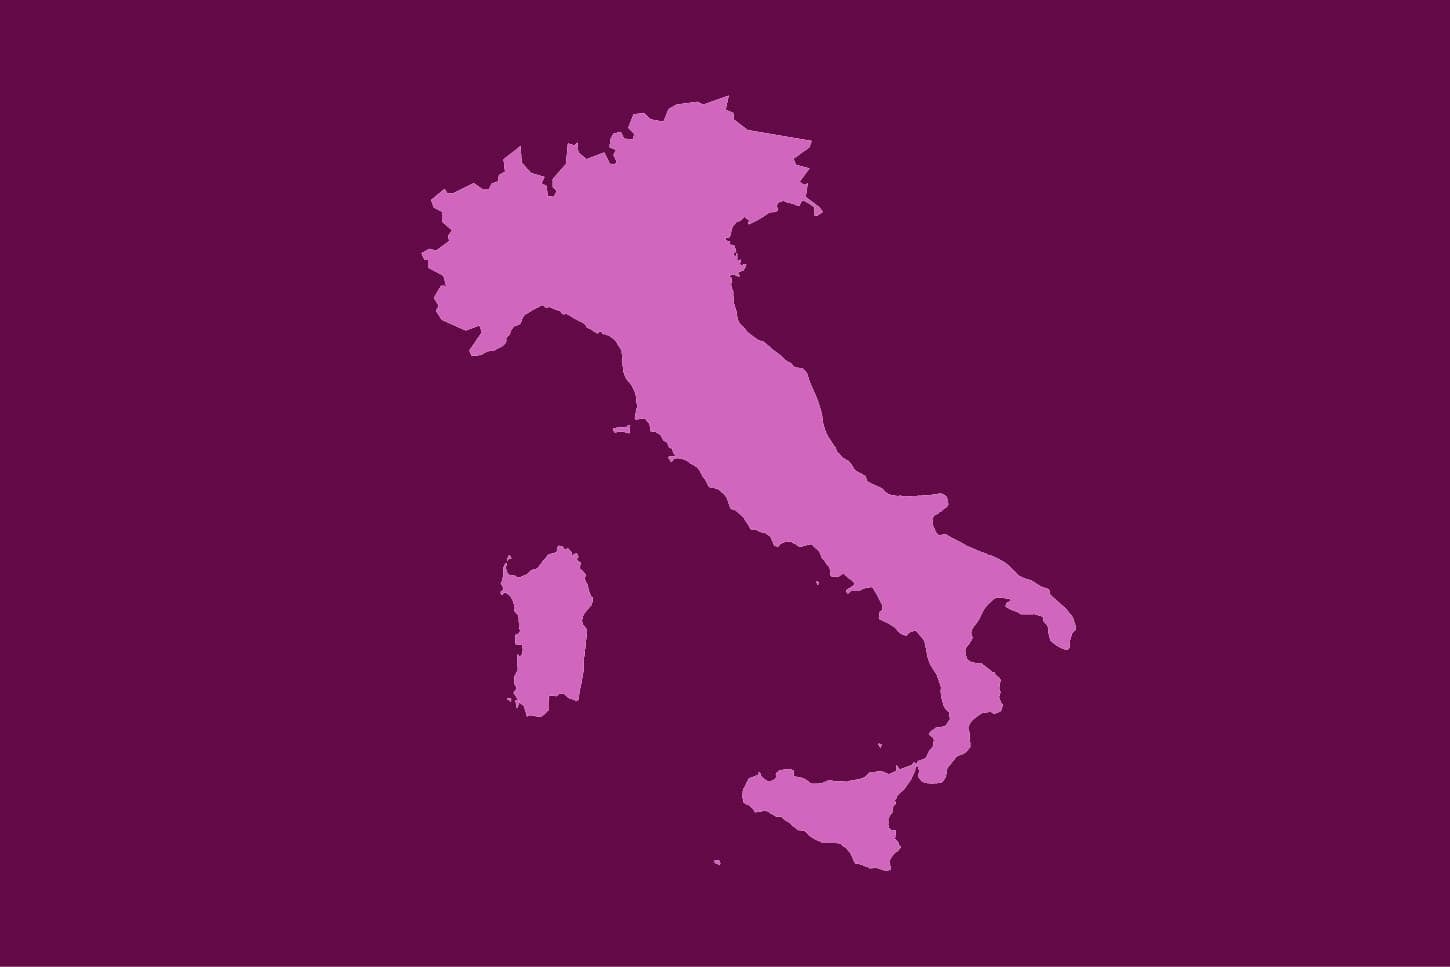 Map image of Italy in shades of purple